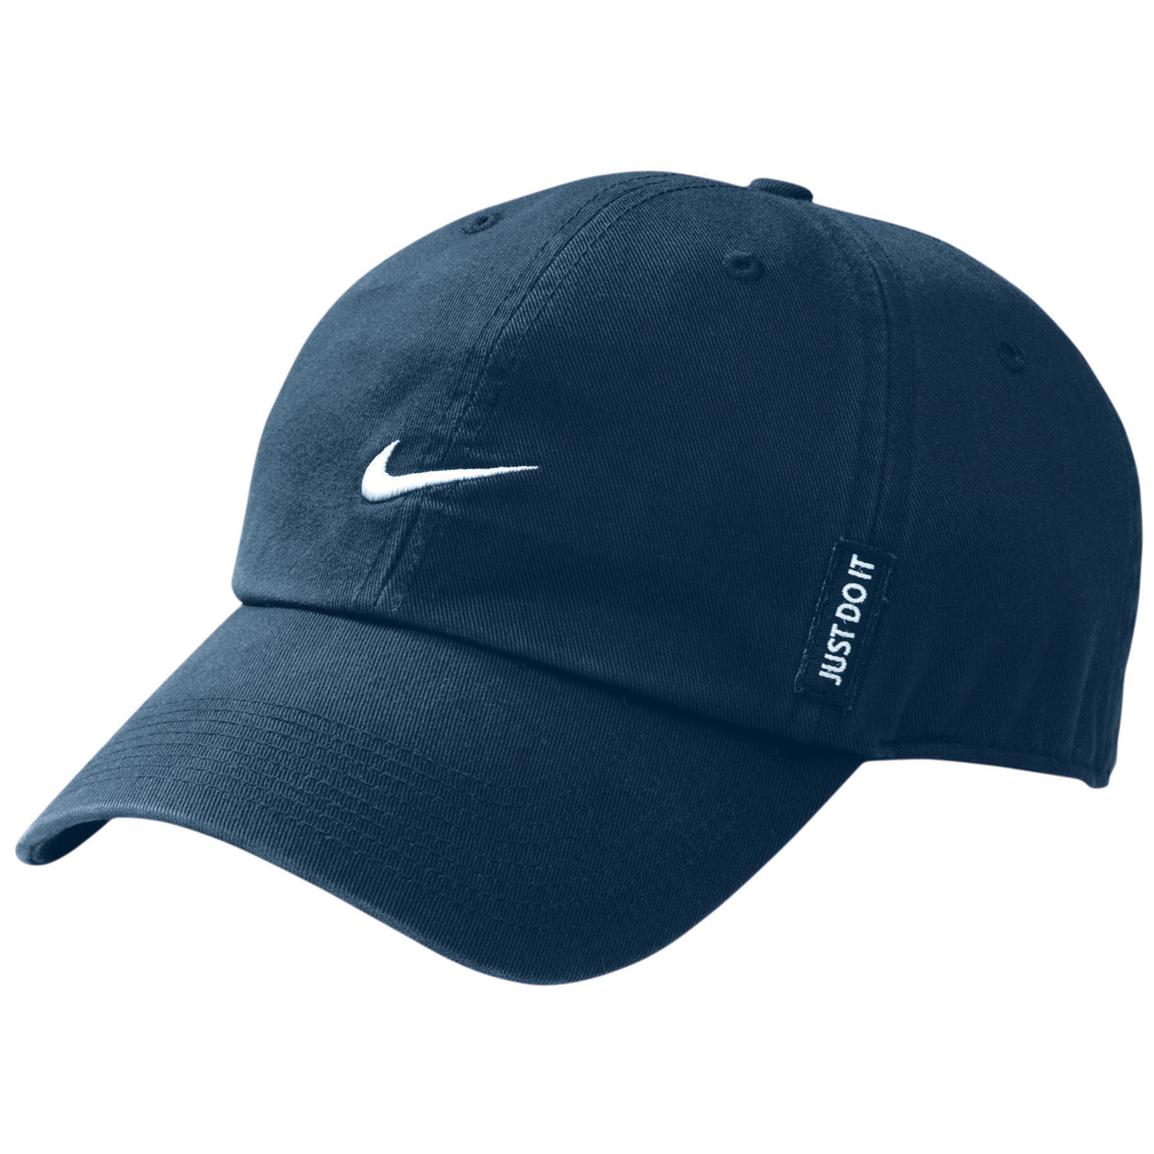 Mens Nike® Relaxed Swoosh Cap 143807 Hats And Caps At Sportsmans Guide